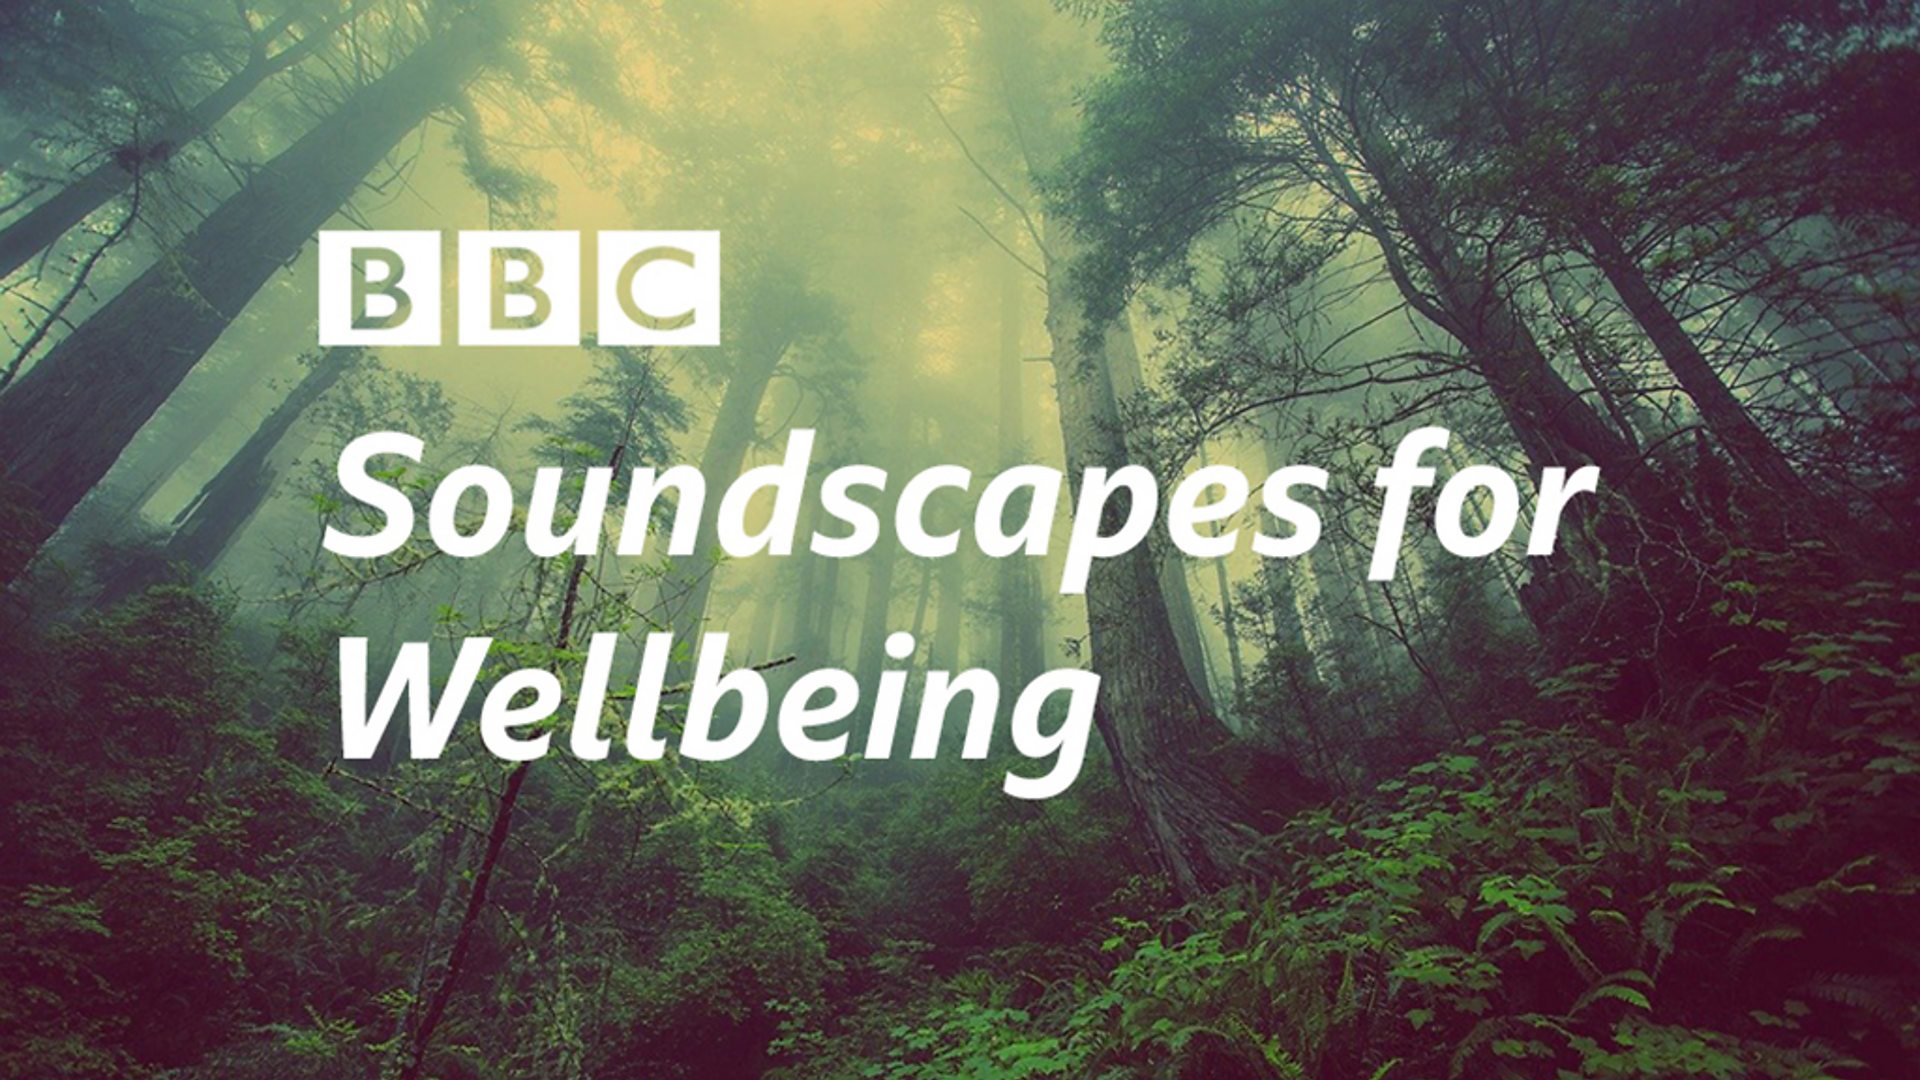 for Wellbeing aims to nature to everyone - Media